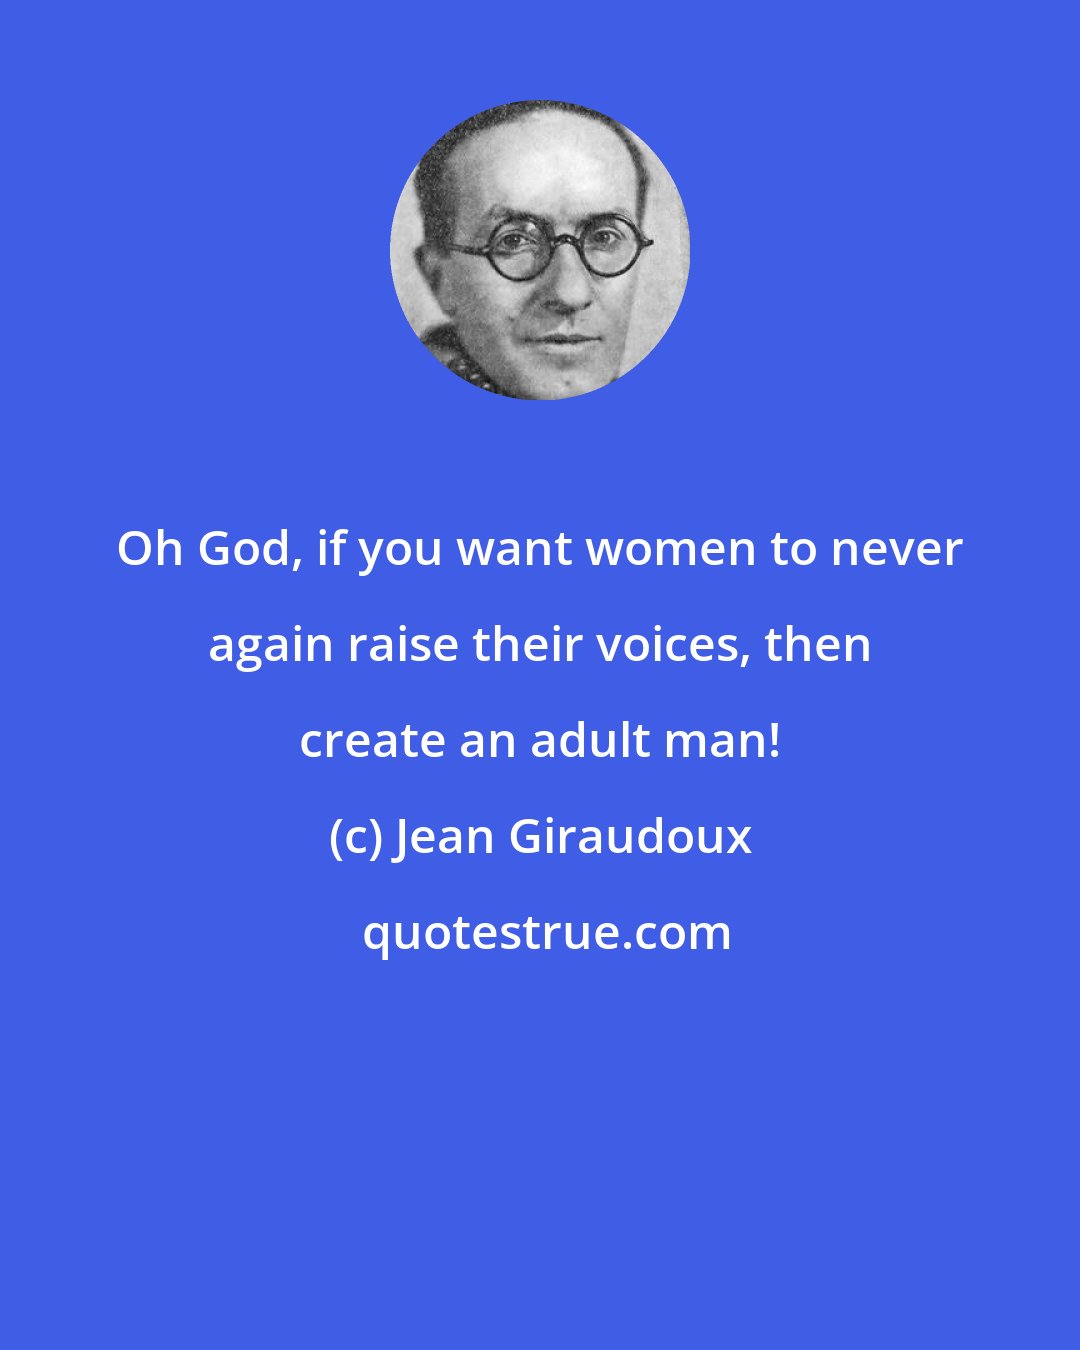 Jean Giraudoux: Oh God, if you want women to never again raise their voices, then create an adult man!